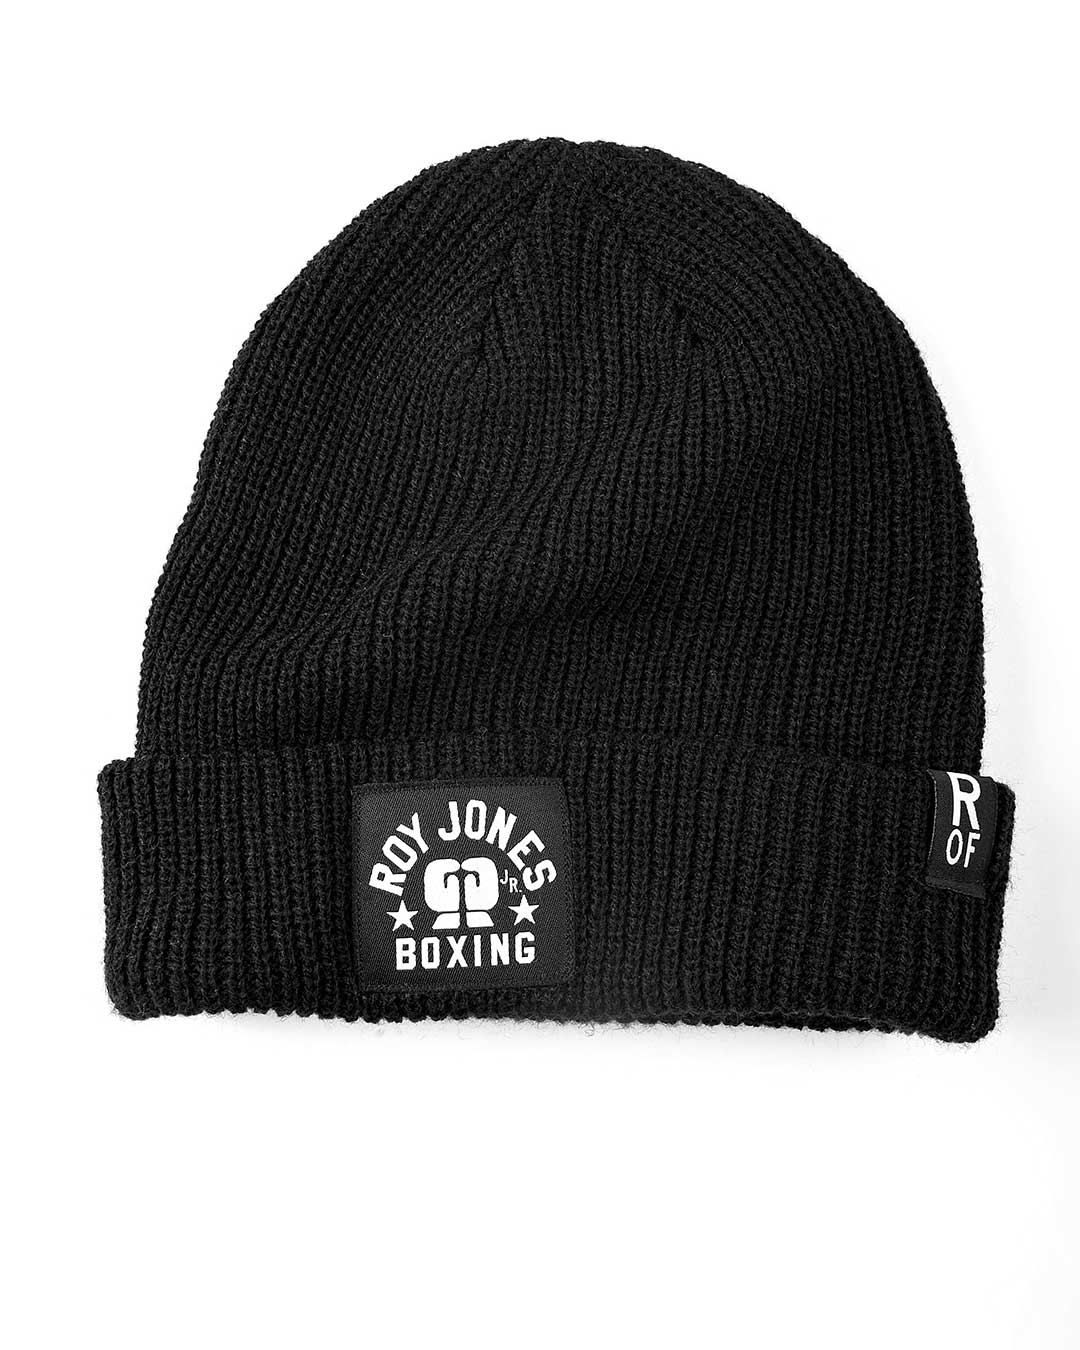 Roy Jones Jr. Boxing Black Beanie - Roots of Fight Canada